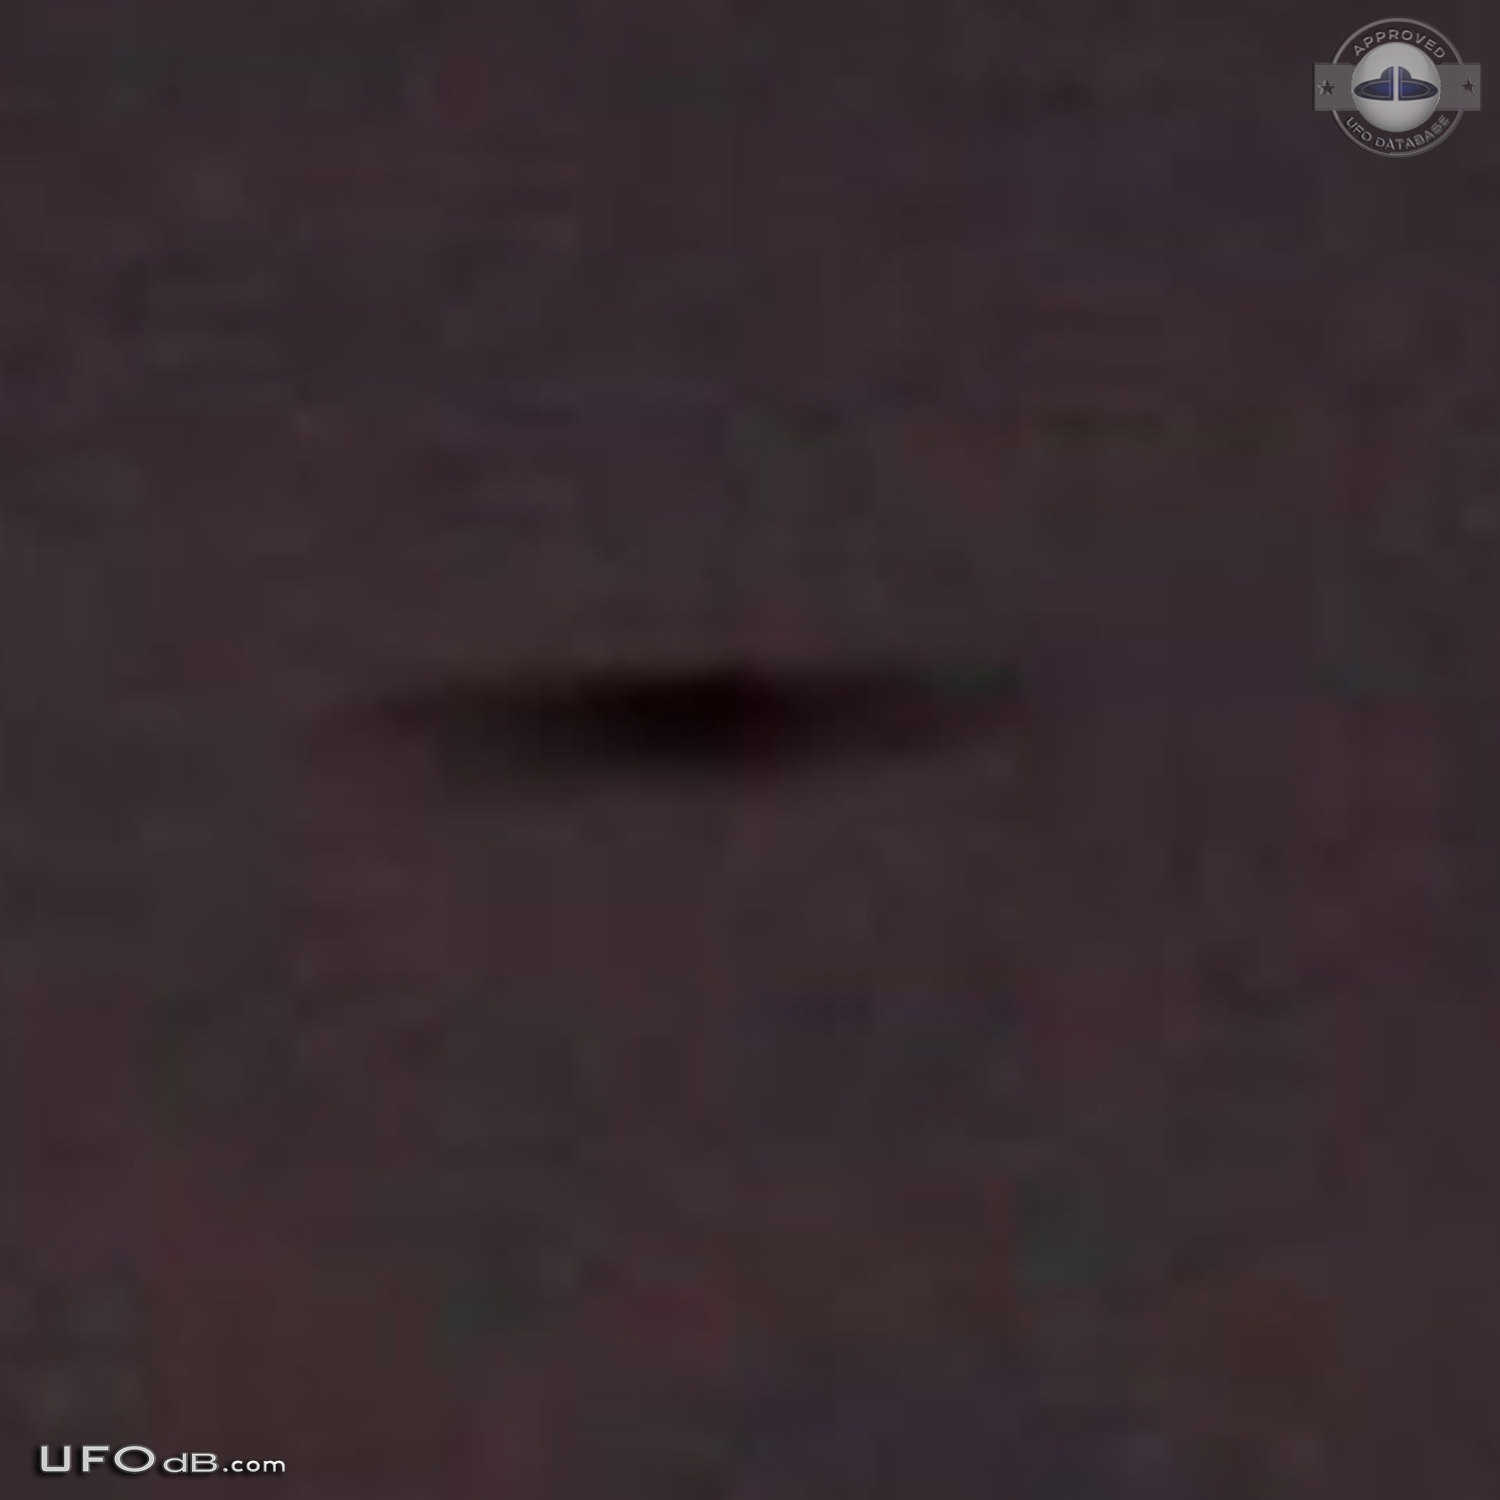 Rainbow Photo get UFO passing over San Fransisco, California USA 2012 UFO Picture #489-3